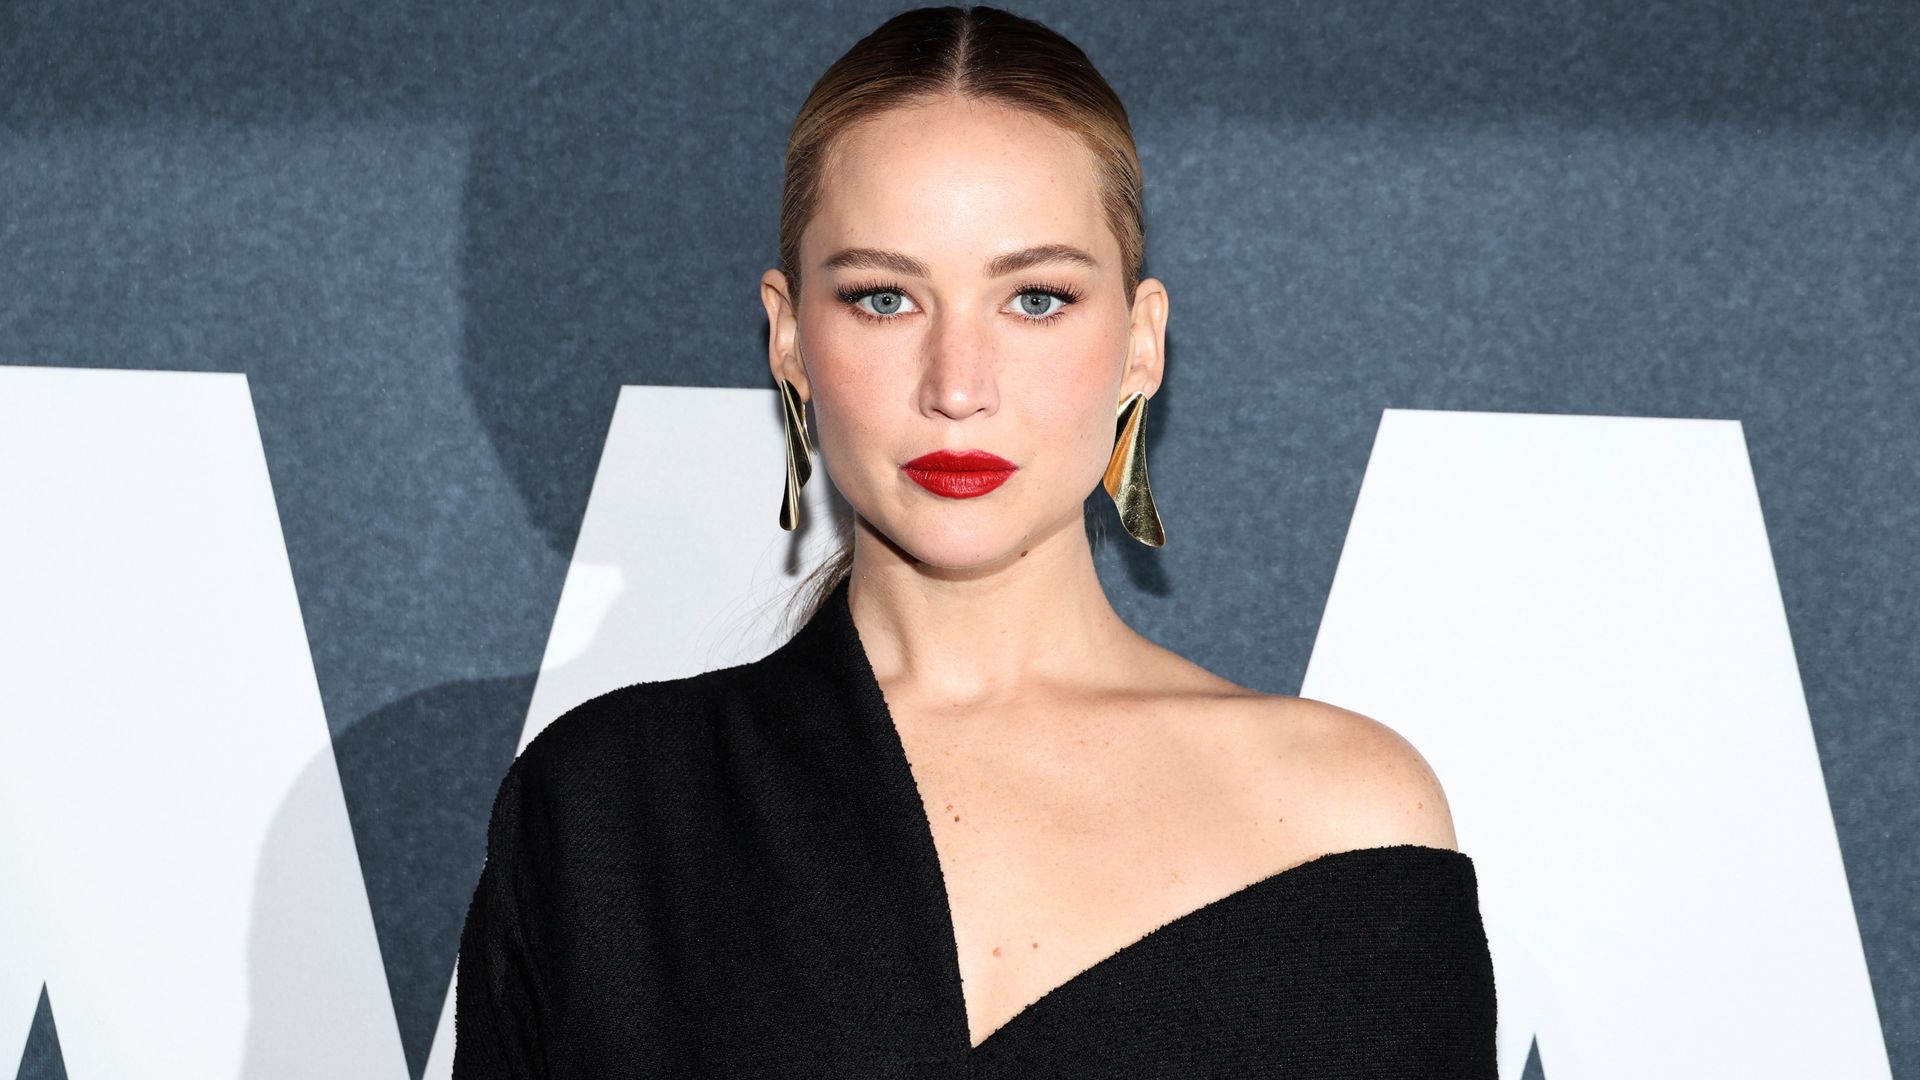 Jennifer Lawrence steals the show in a black off-the-shoulder dress at New York event